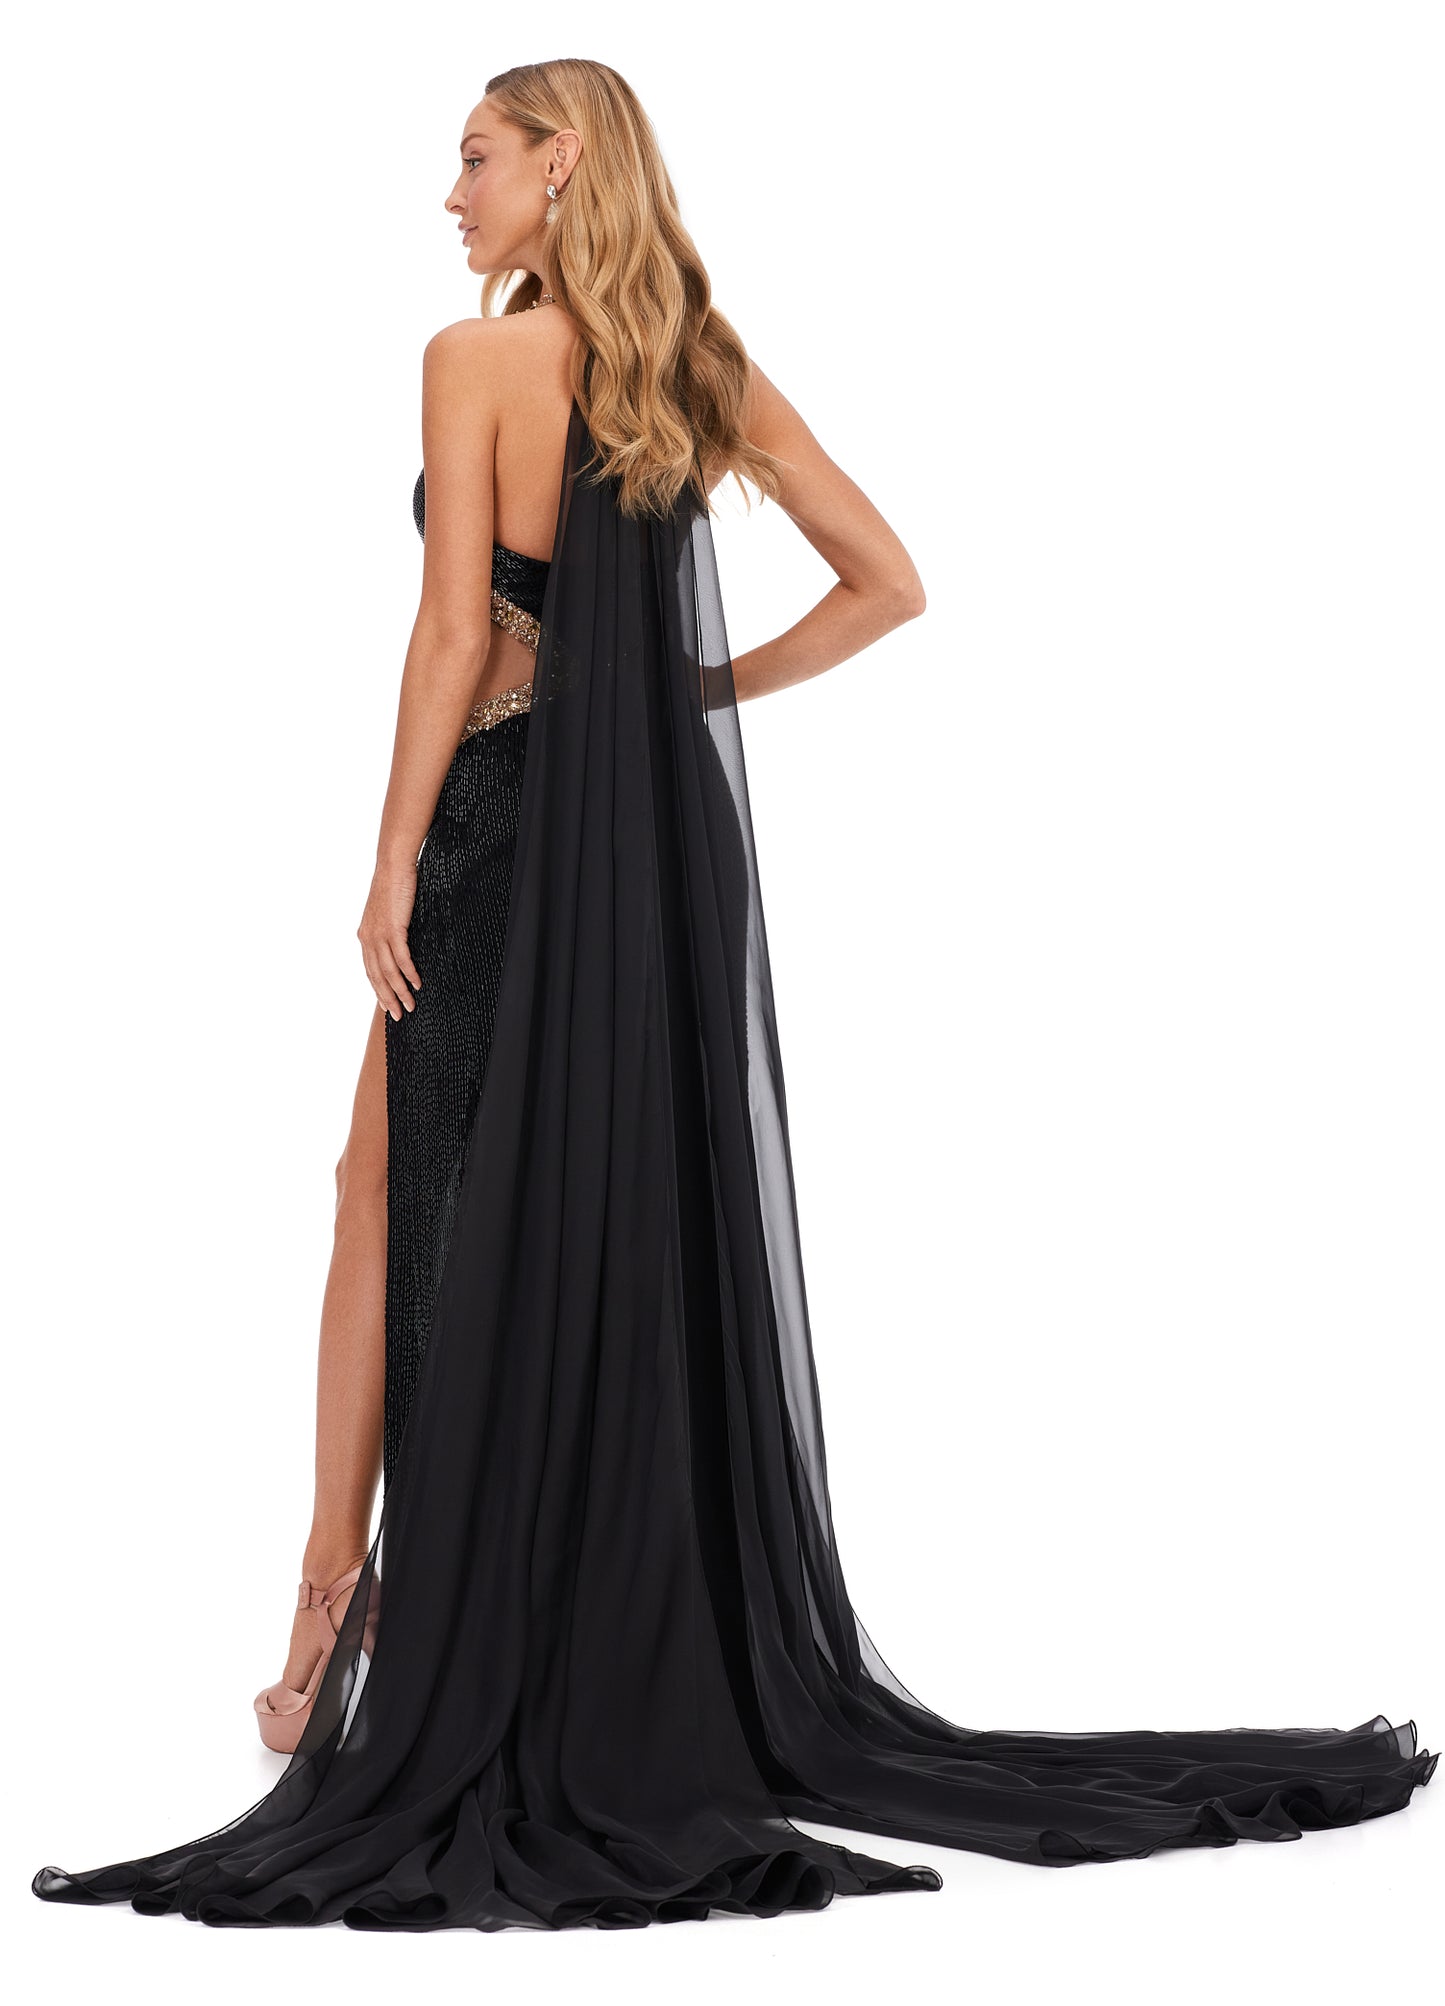 Ashley Lauren 11399 Halter Neckline Liquid Beaded Chiffon Cape Illusion Cut Outs With Crystal Detail Formal Dress . Sparkle from every angle in this elegantly detailed gown. The liquid beading is met with crystal accents that follow the dresses cut outs. With a gorgeous flowing cape, this dress is going to make you feel and look glamorous!